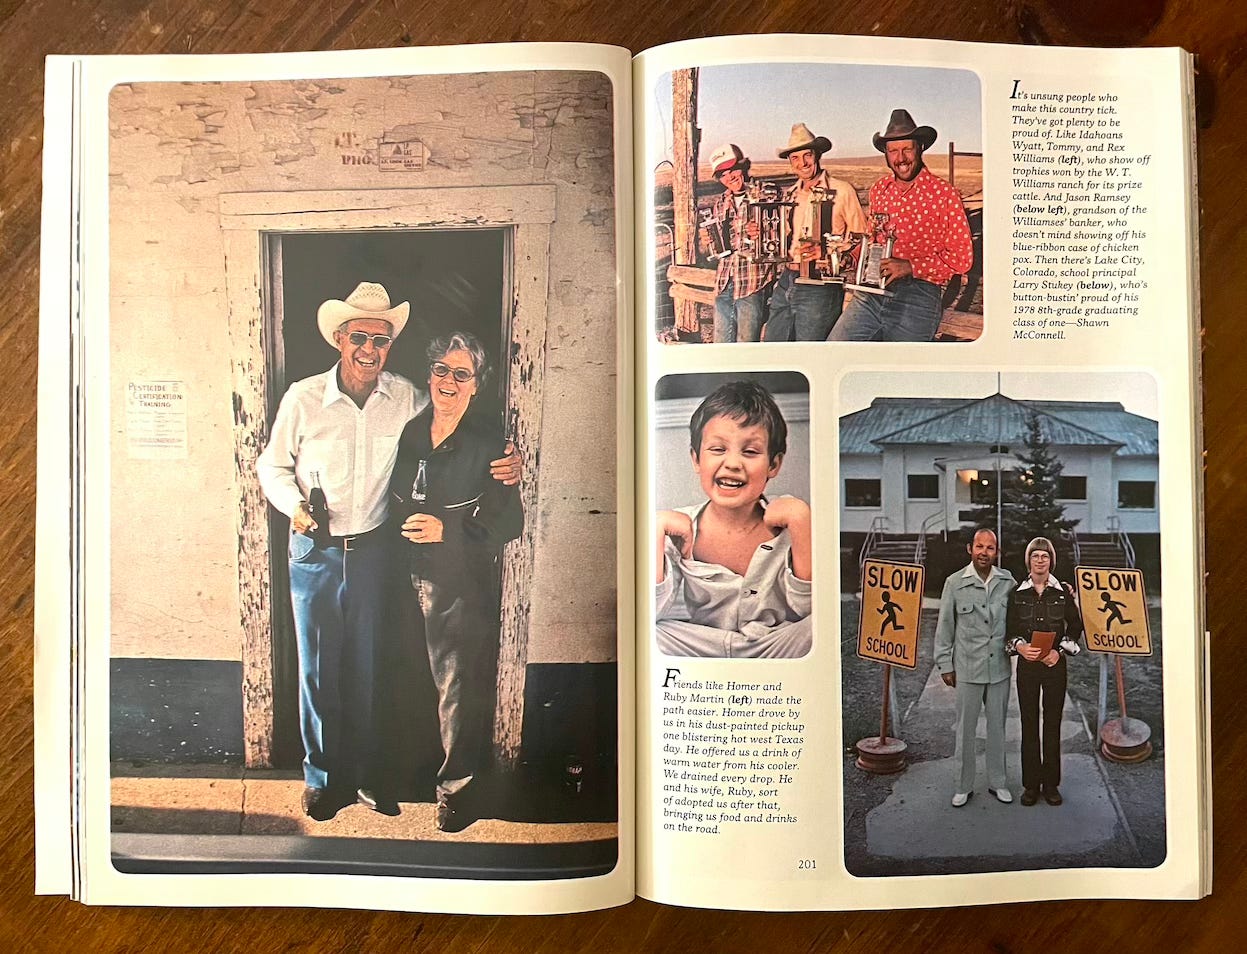 National Geographic magazine lies open on a wooden table: On the left page is a photograph of a man in a white cowboy hat, white shirt and blue jeans, with his arm around a woman wearing black. Standing in front of a building where the paint is chipped and peeling, both hold bottles of Coca Cola and are laughing. On the right page are three photographs: a group of cowboys holding trophies, a little boy pulling a silly face, and two men in seventies leisure suits standing on the sidewalk in front of a school.